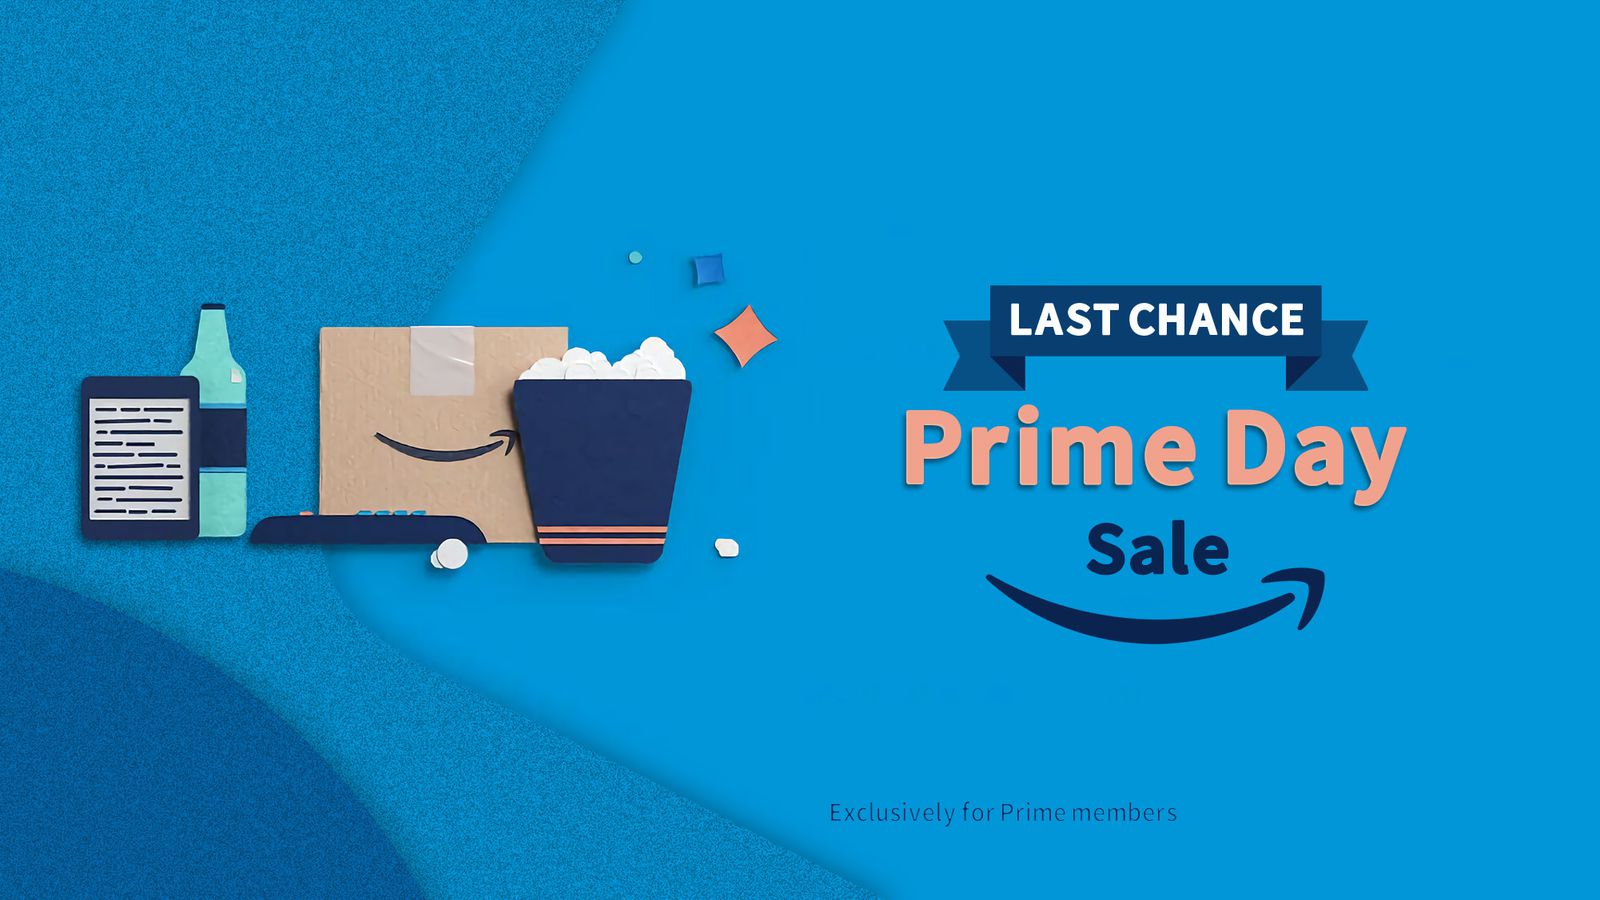 Here Are the Best Apple Deals You Can Still Get Before Amazon Prime Day